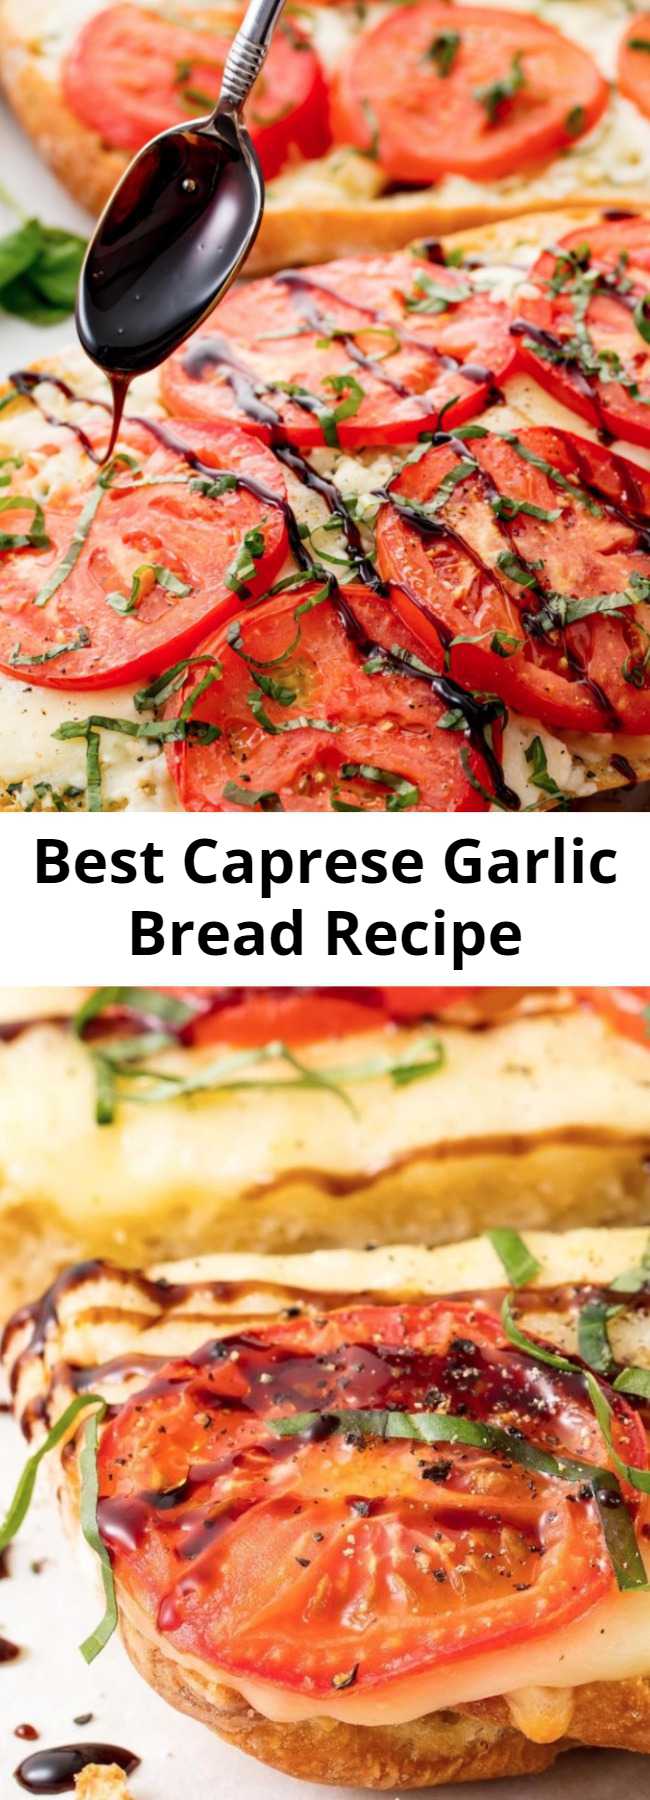 Best Caprese Garlic Bread Recipe - Looking for a garlic bread recipe? This Caprese Garlic Bread is the best. This recipe is even wonderful when tomatoes aren't in season. In the oven, sad-looking slices take on a deeper, sweeter, more tomato-y flavor. If you don't want to make your own balsamic glaze, you can find it bottled at most grocery stores.